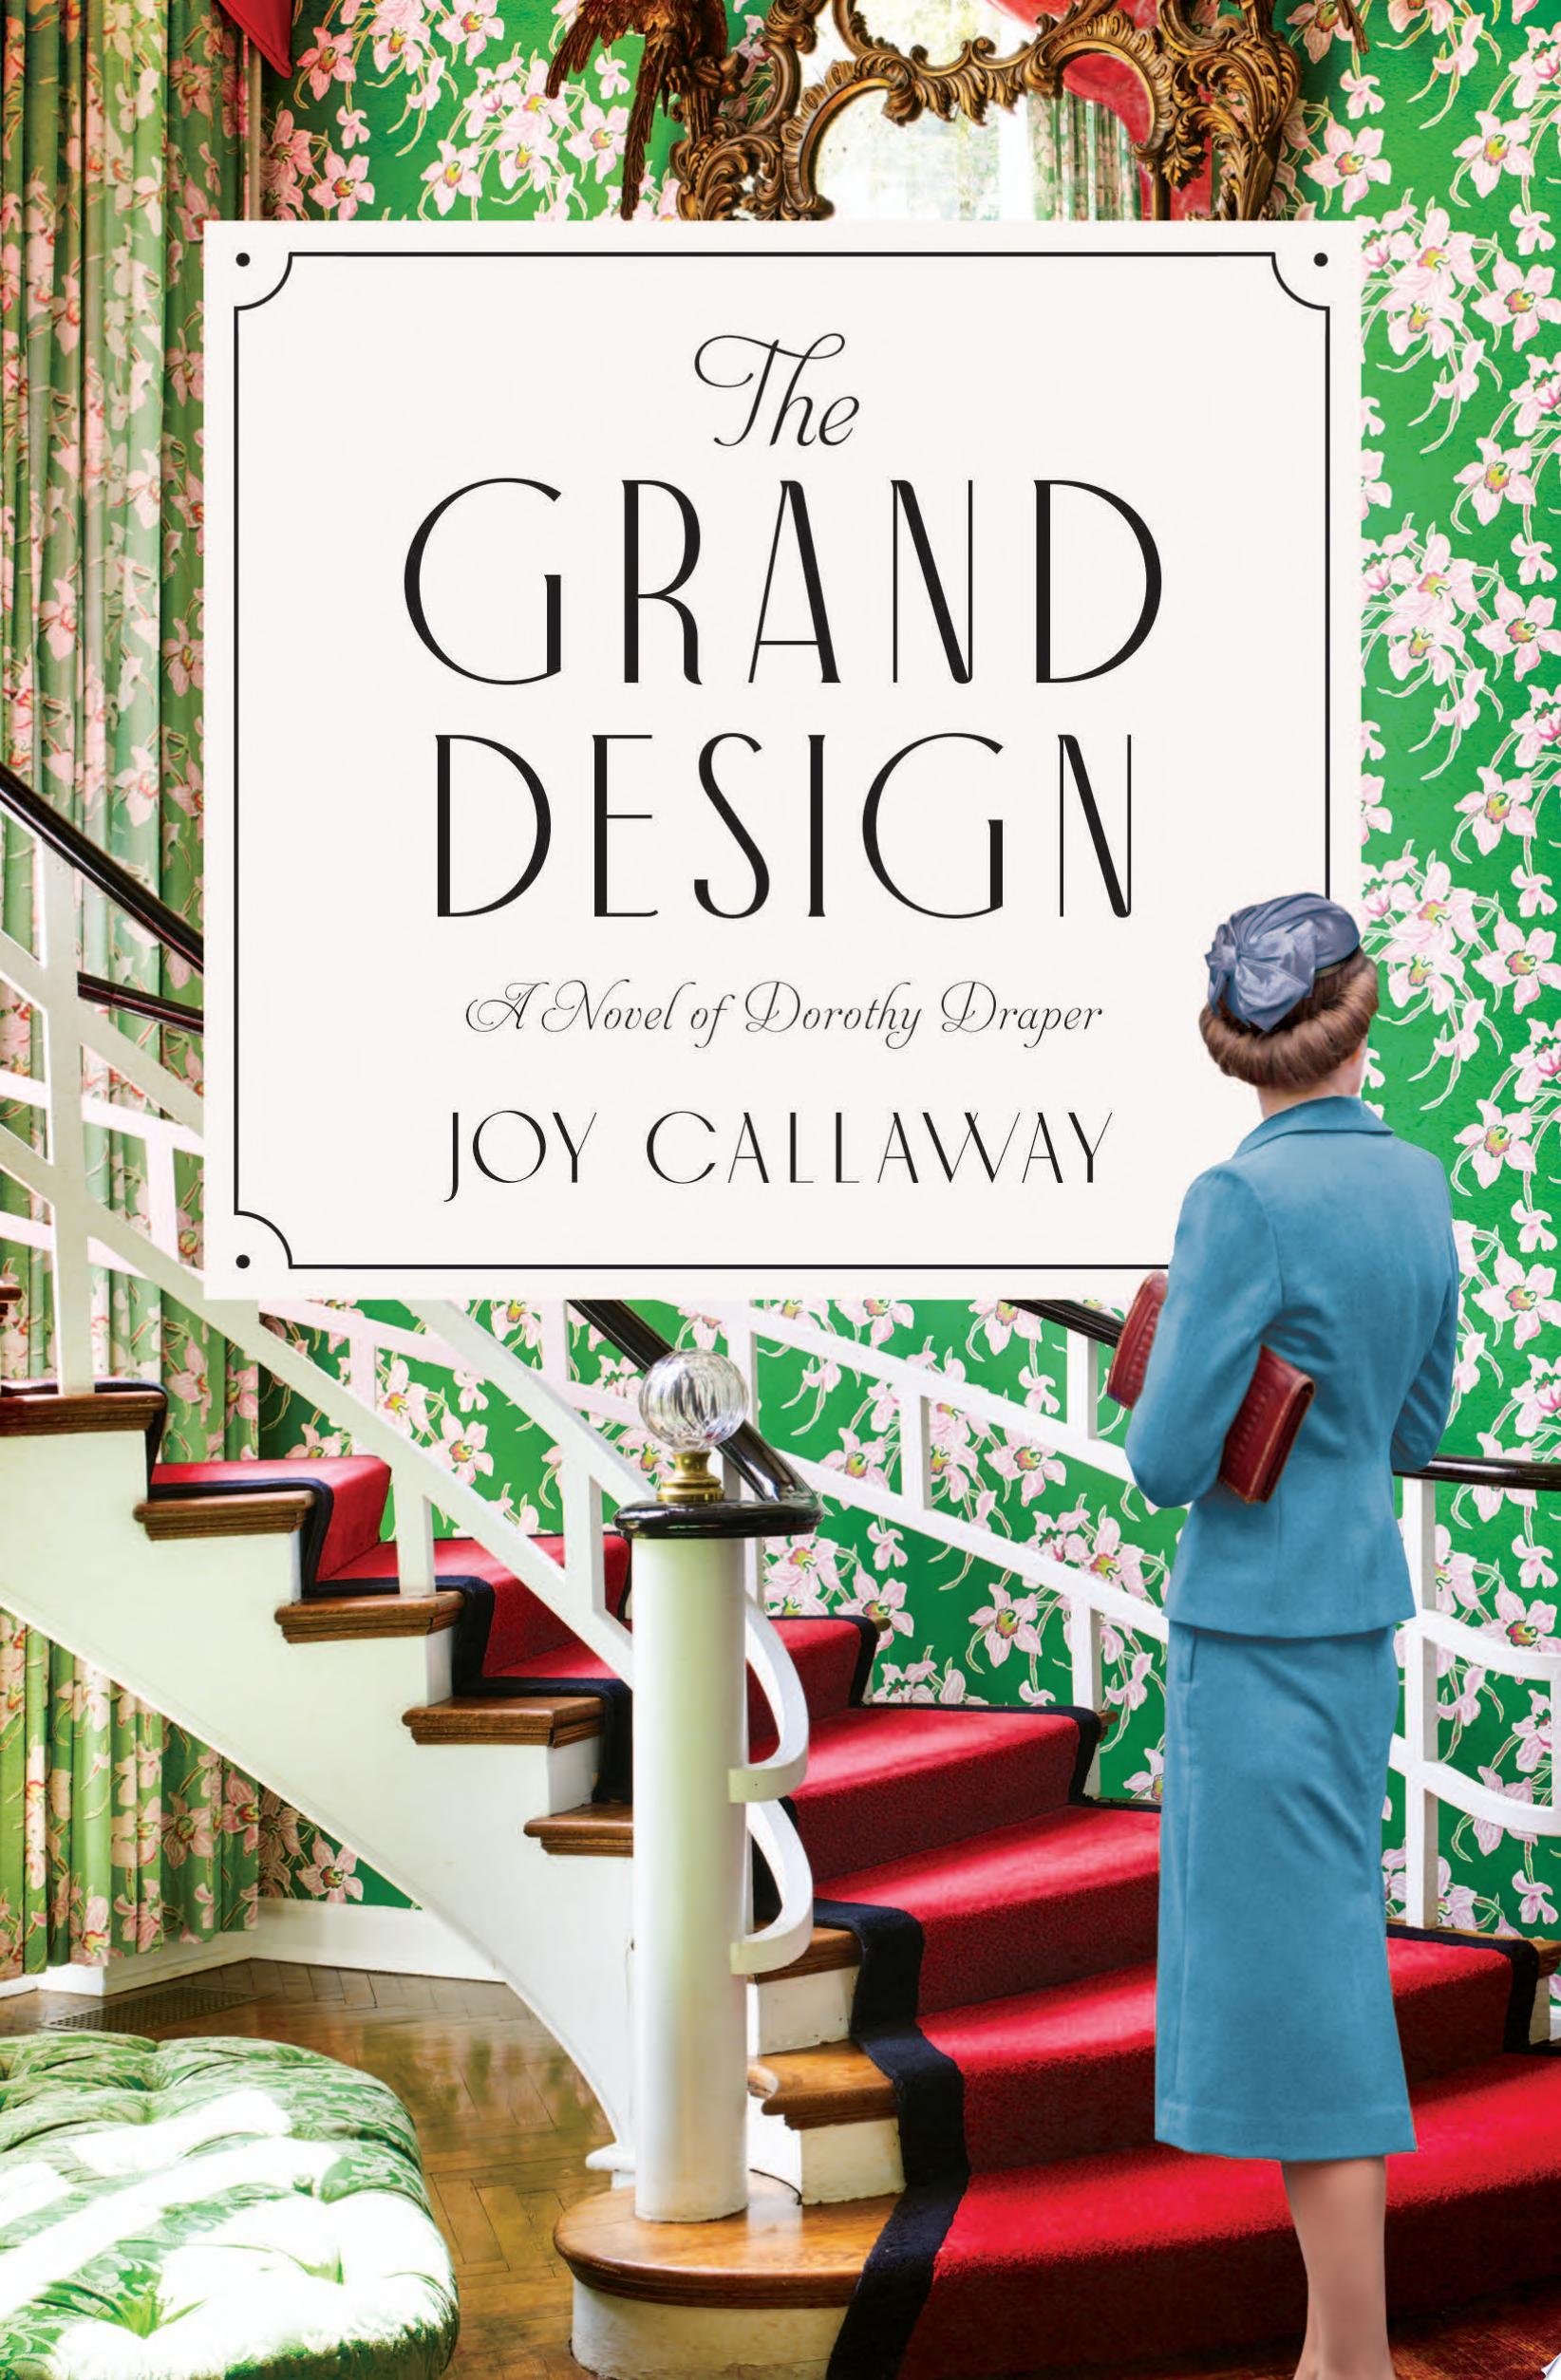 Image for "The Grand Design"